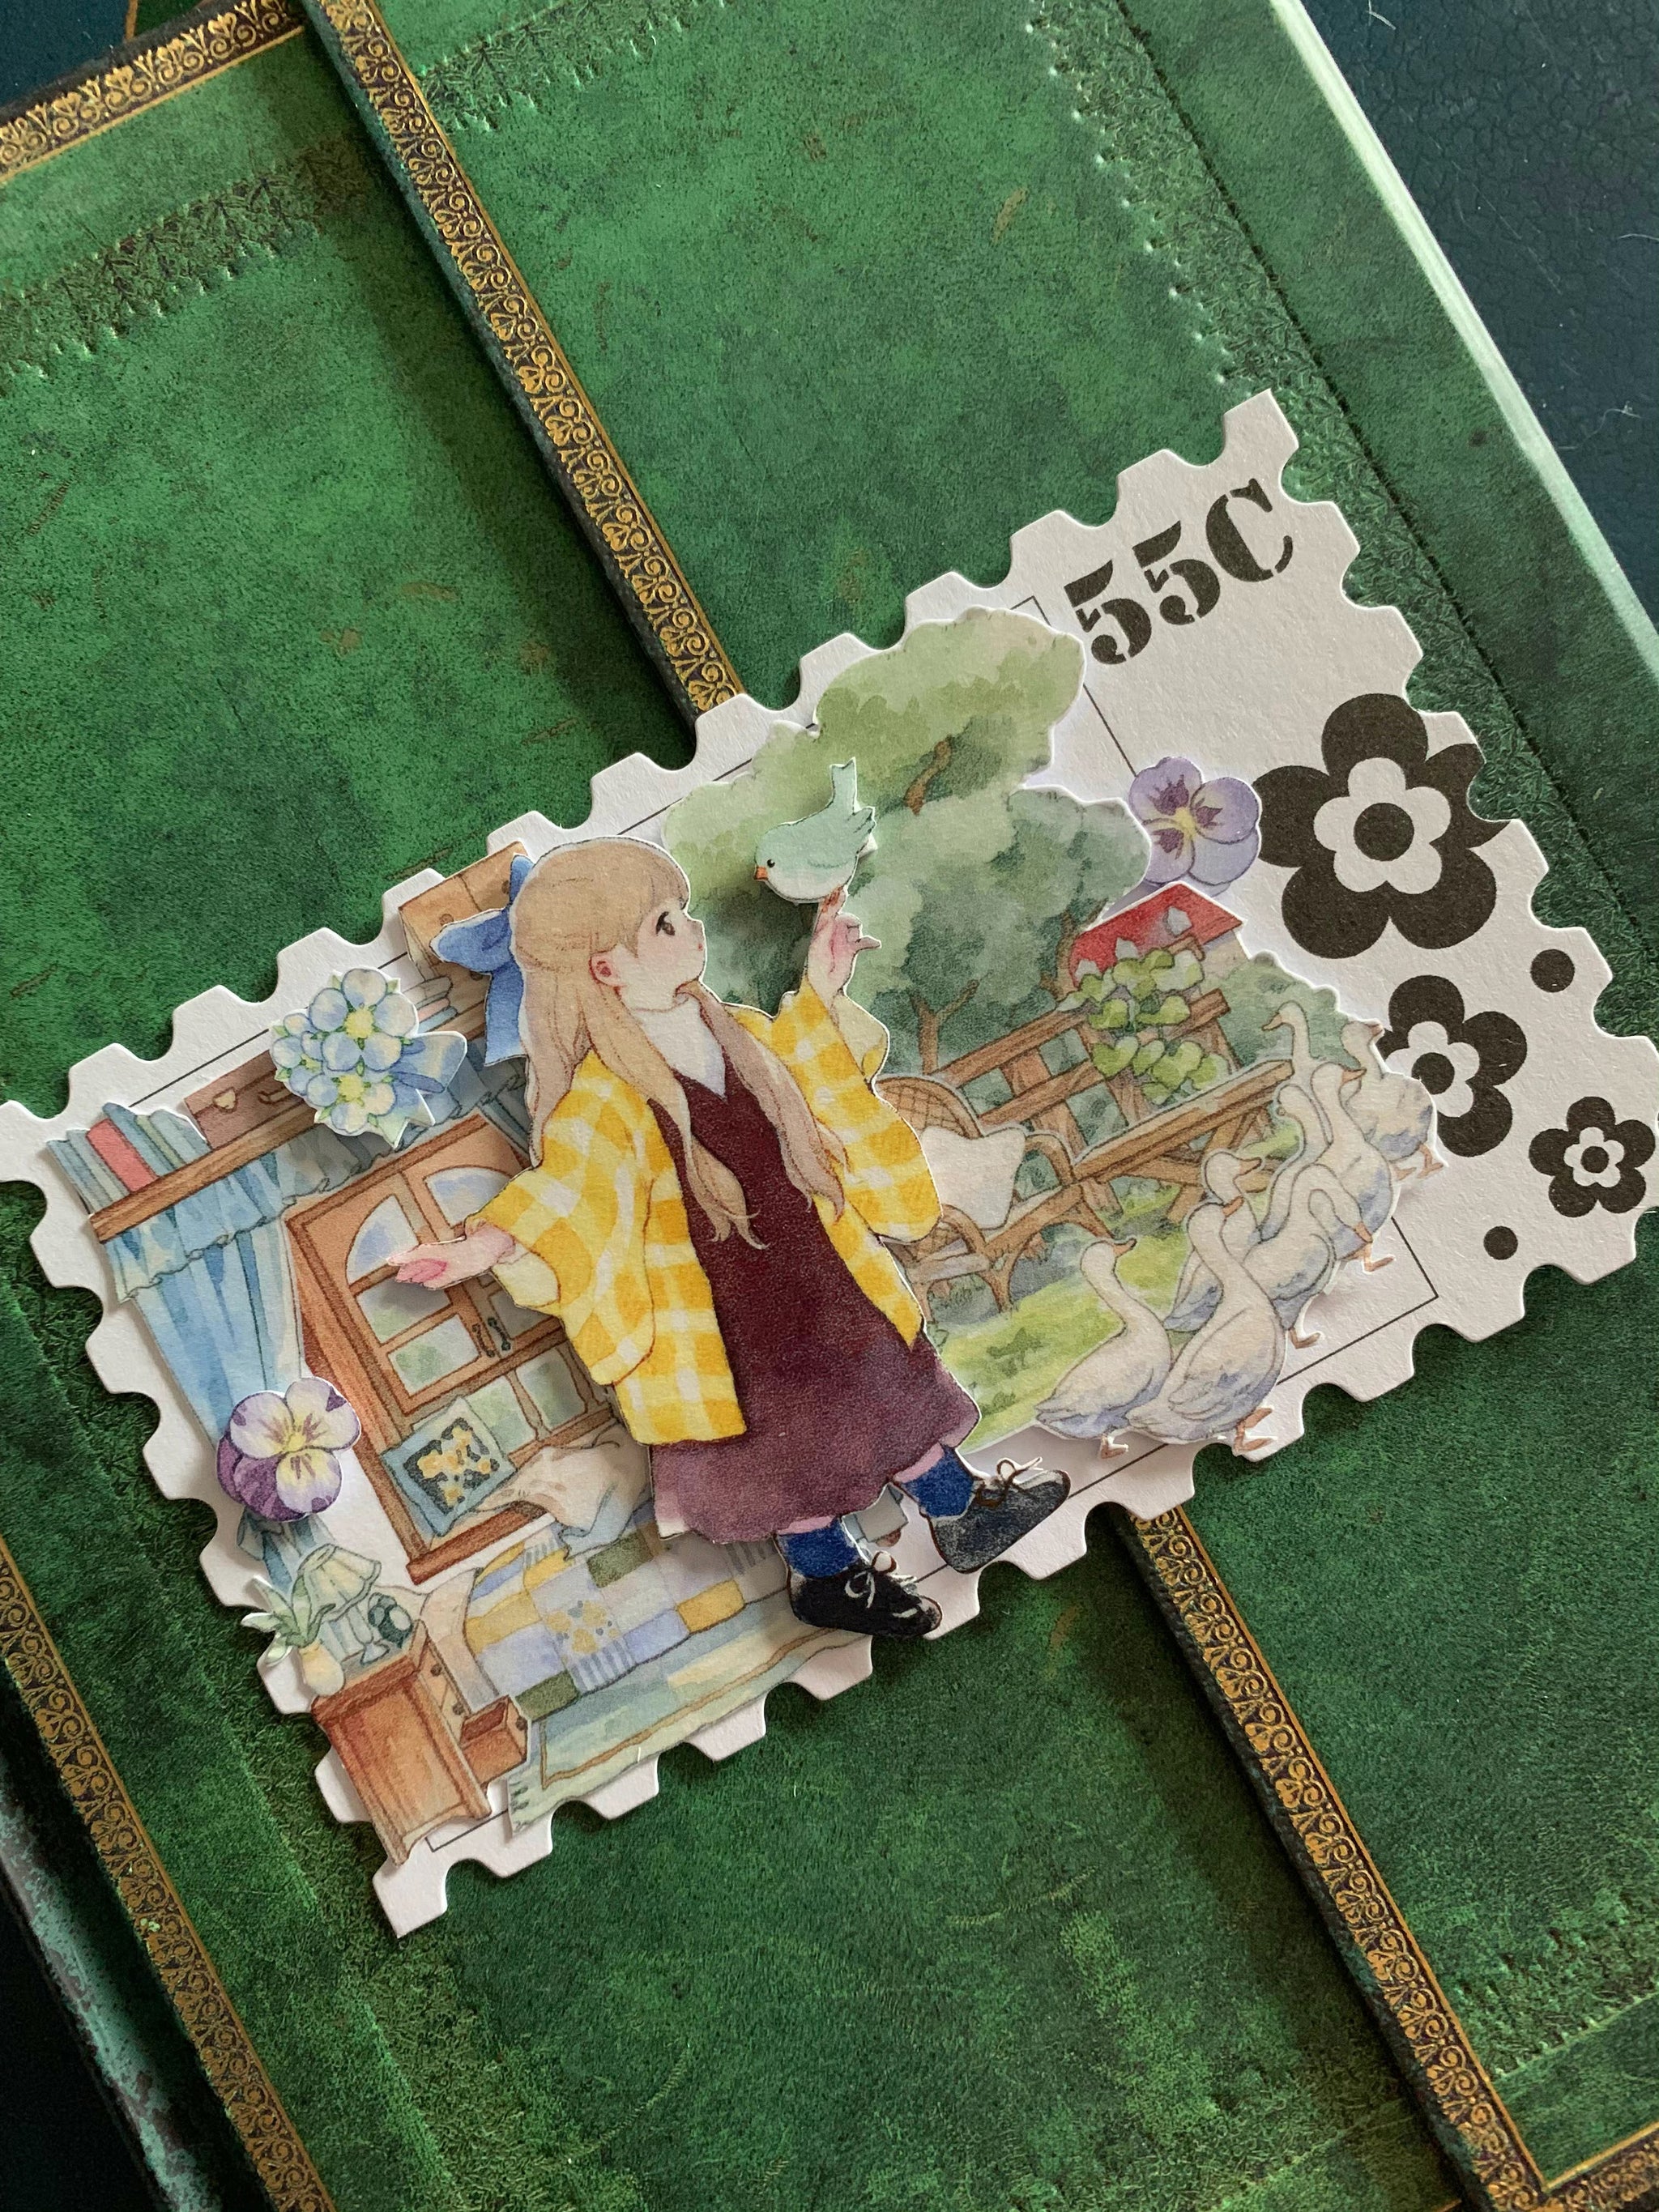 Tianxiaobao's Starry Sky: The Girls 2 Masking Tape